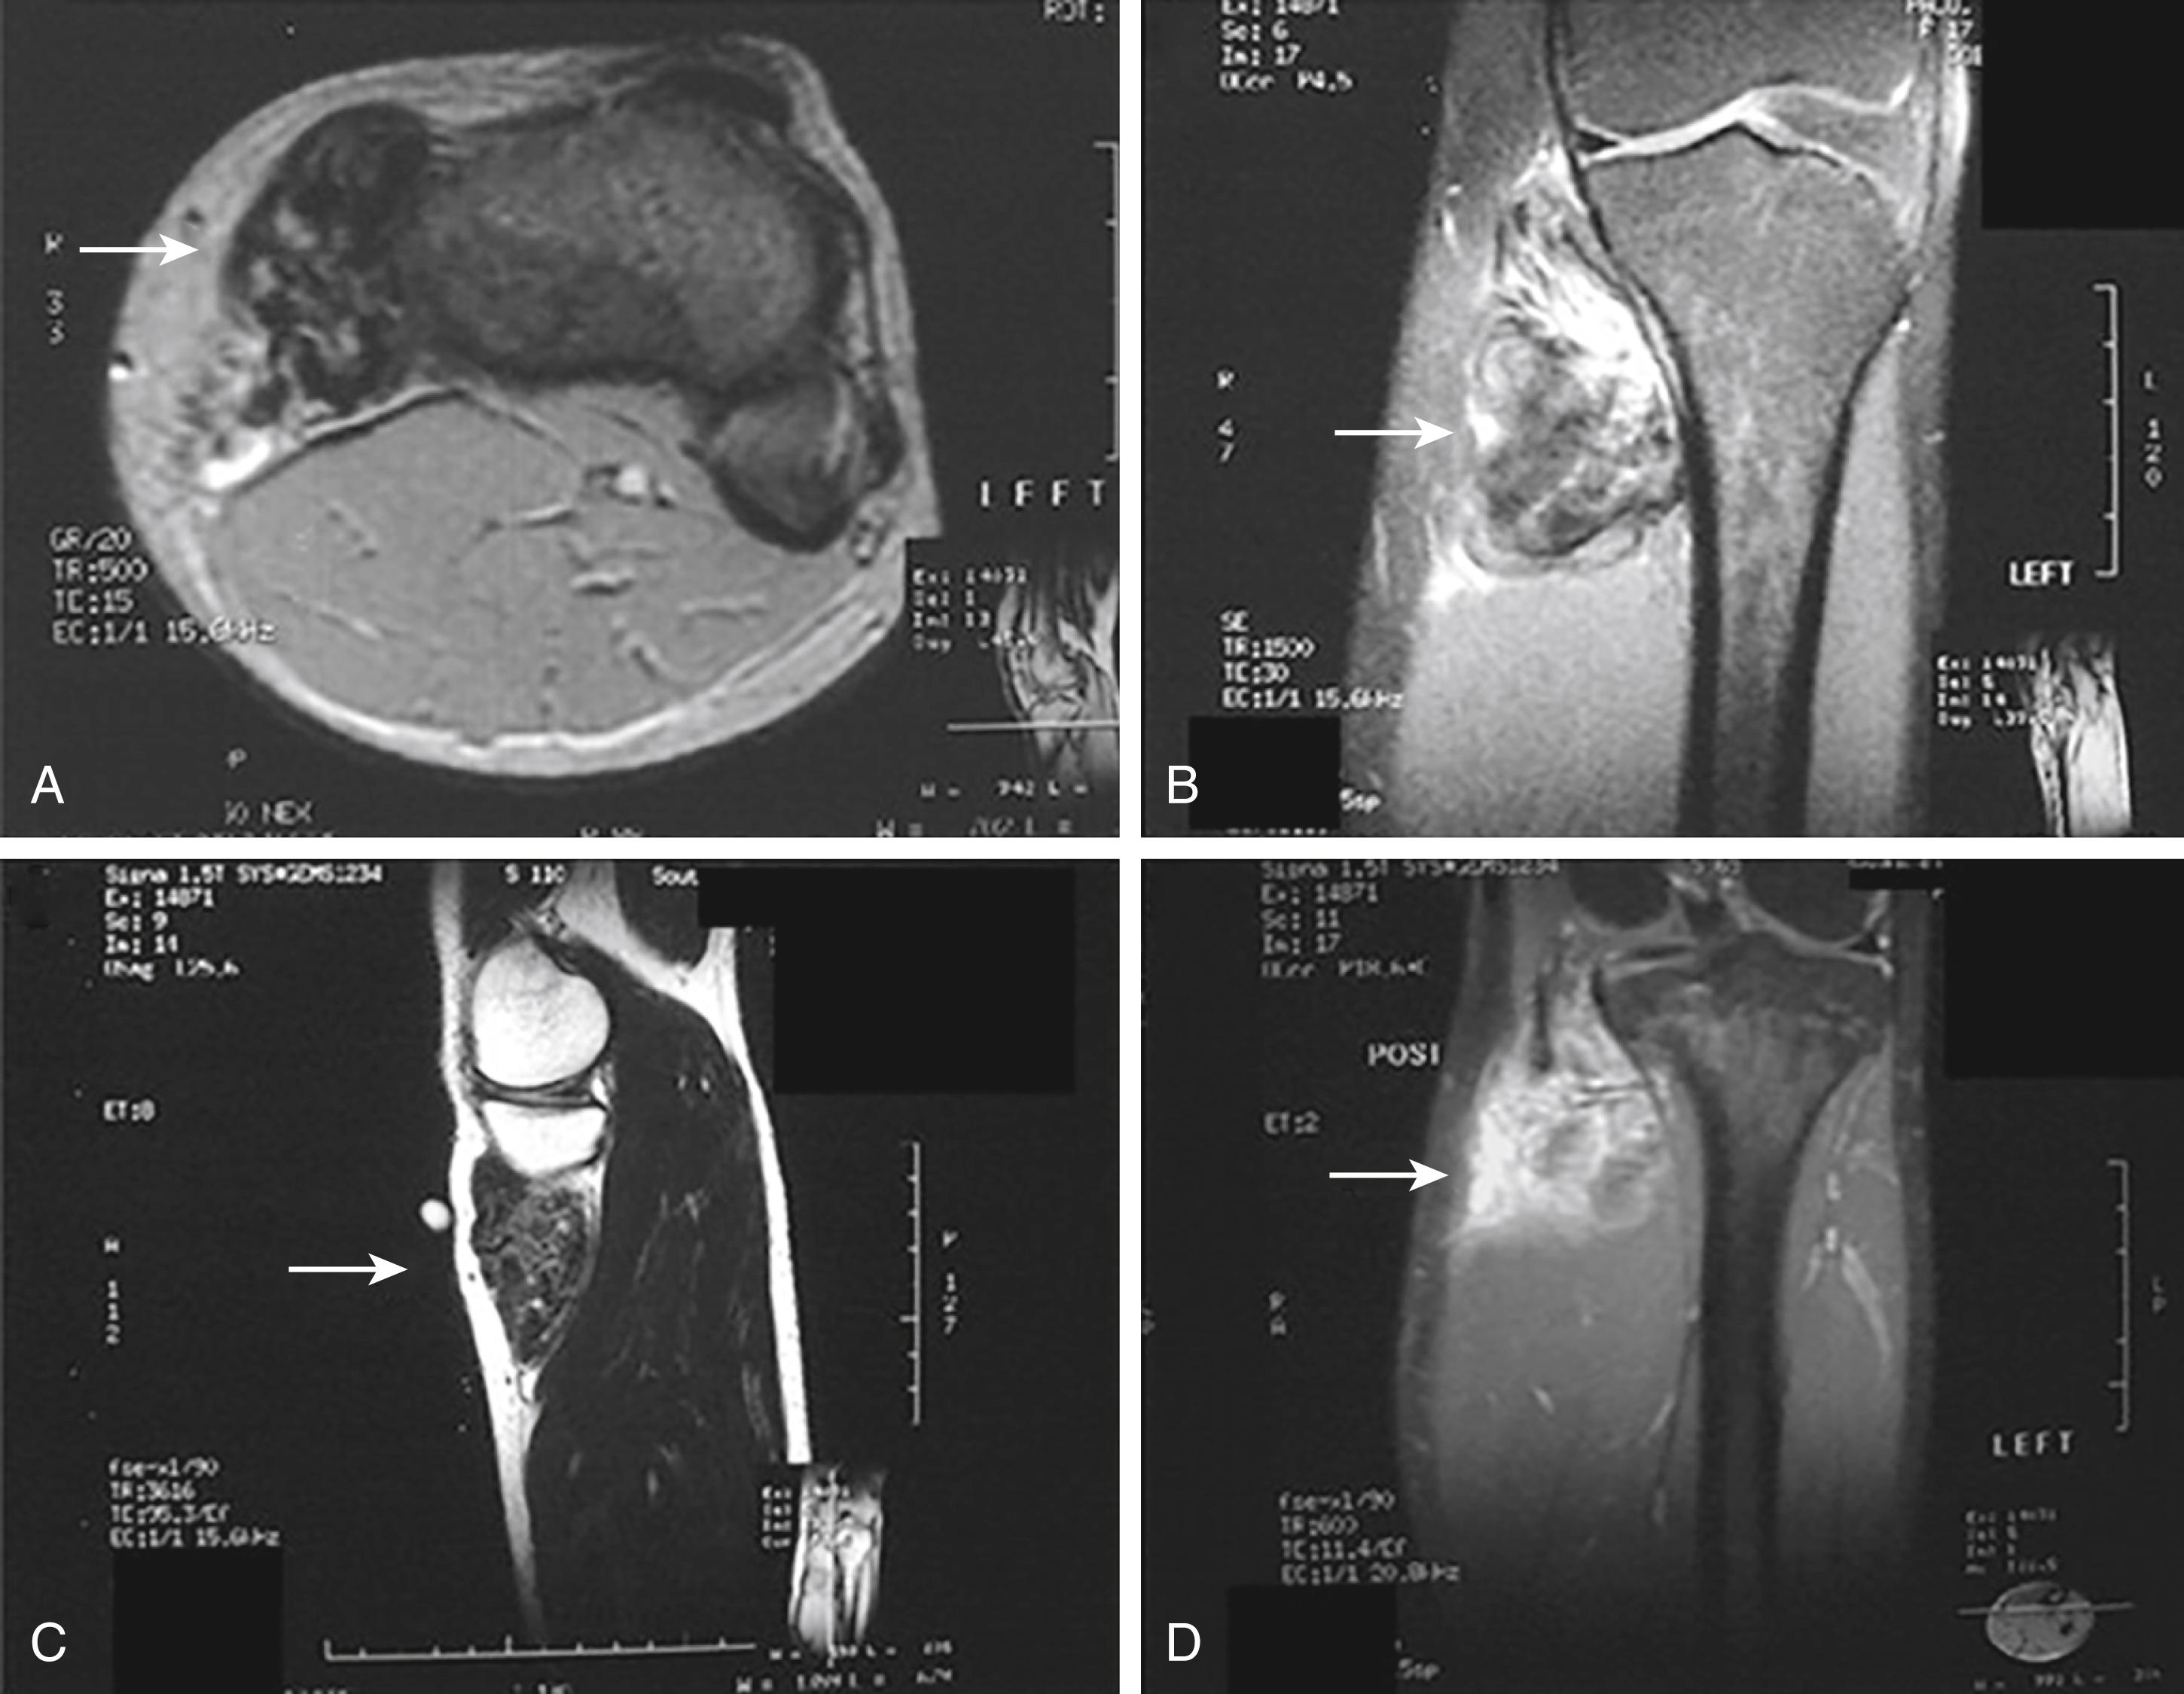 FIG. 161.5, Magnetic resonance imaging with (A) axial fat-saturated T1, (B) coronal short T1 inversion recovery, and (C) sagittal T2-weighted images showing a heterogeneous soft-tissue mass at the insertion of pes anserinus conjoint tendon (the markedly decreased interspersed signal on all images is due to hemosiderin deposits). There is no evidence of bone or joint involvement. There is inhomogeneous peripheral and septal enhancement with contrast (D) on a T1-weighted fat-saturated coronal film.